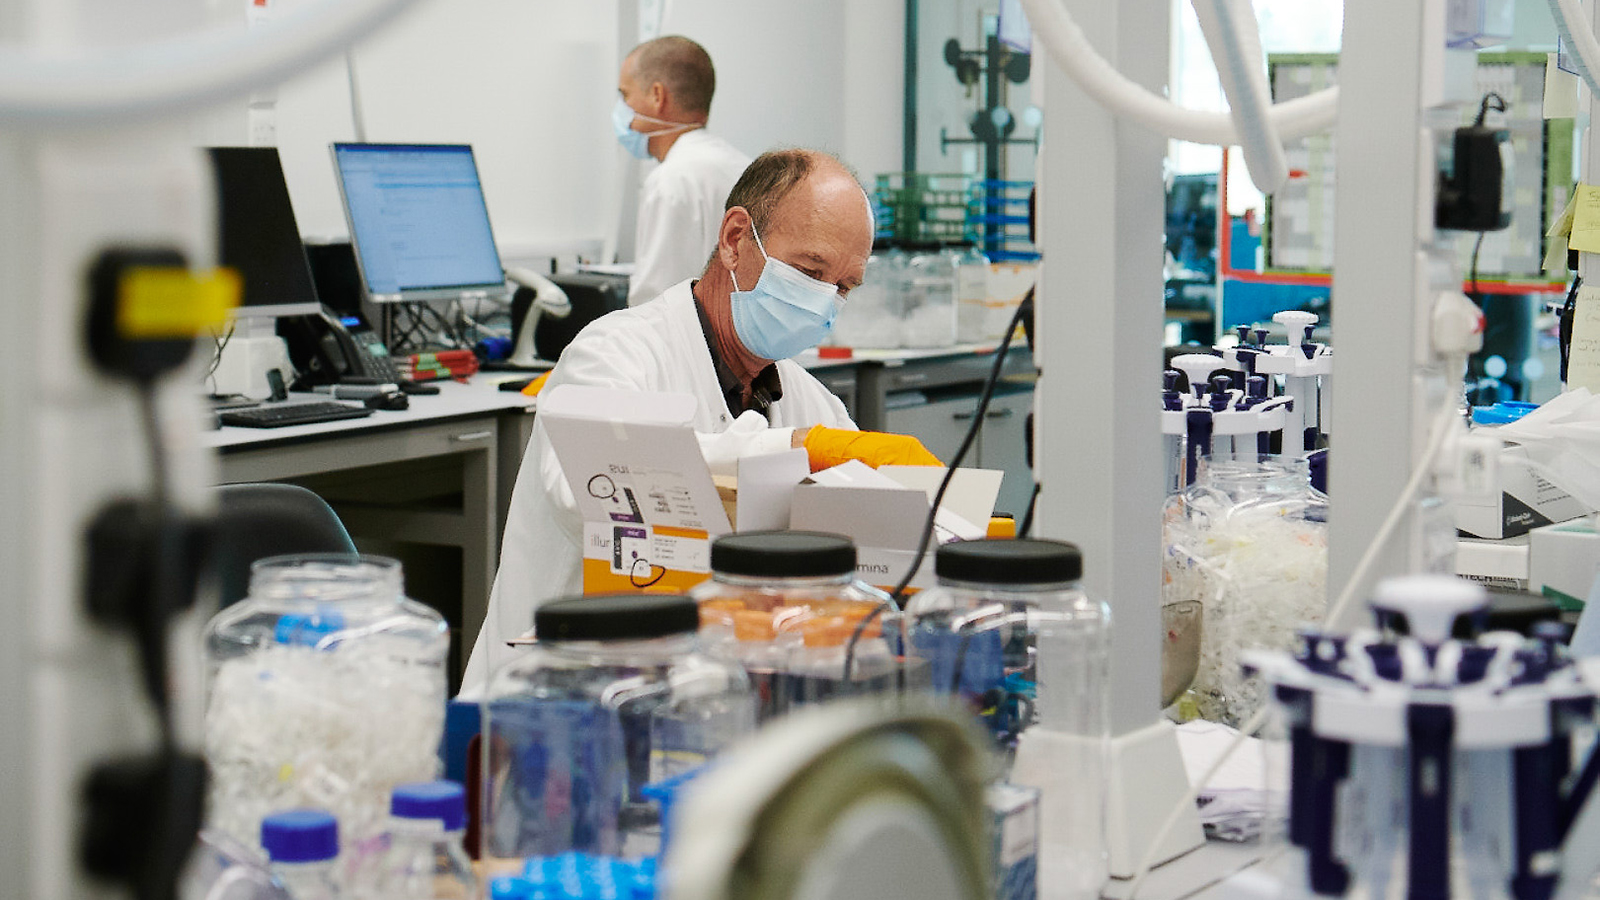 Two scientists wearing facemasks work in a lab, surrounded by lab equipment.